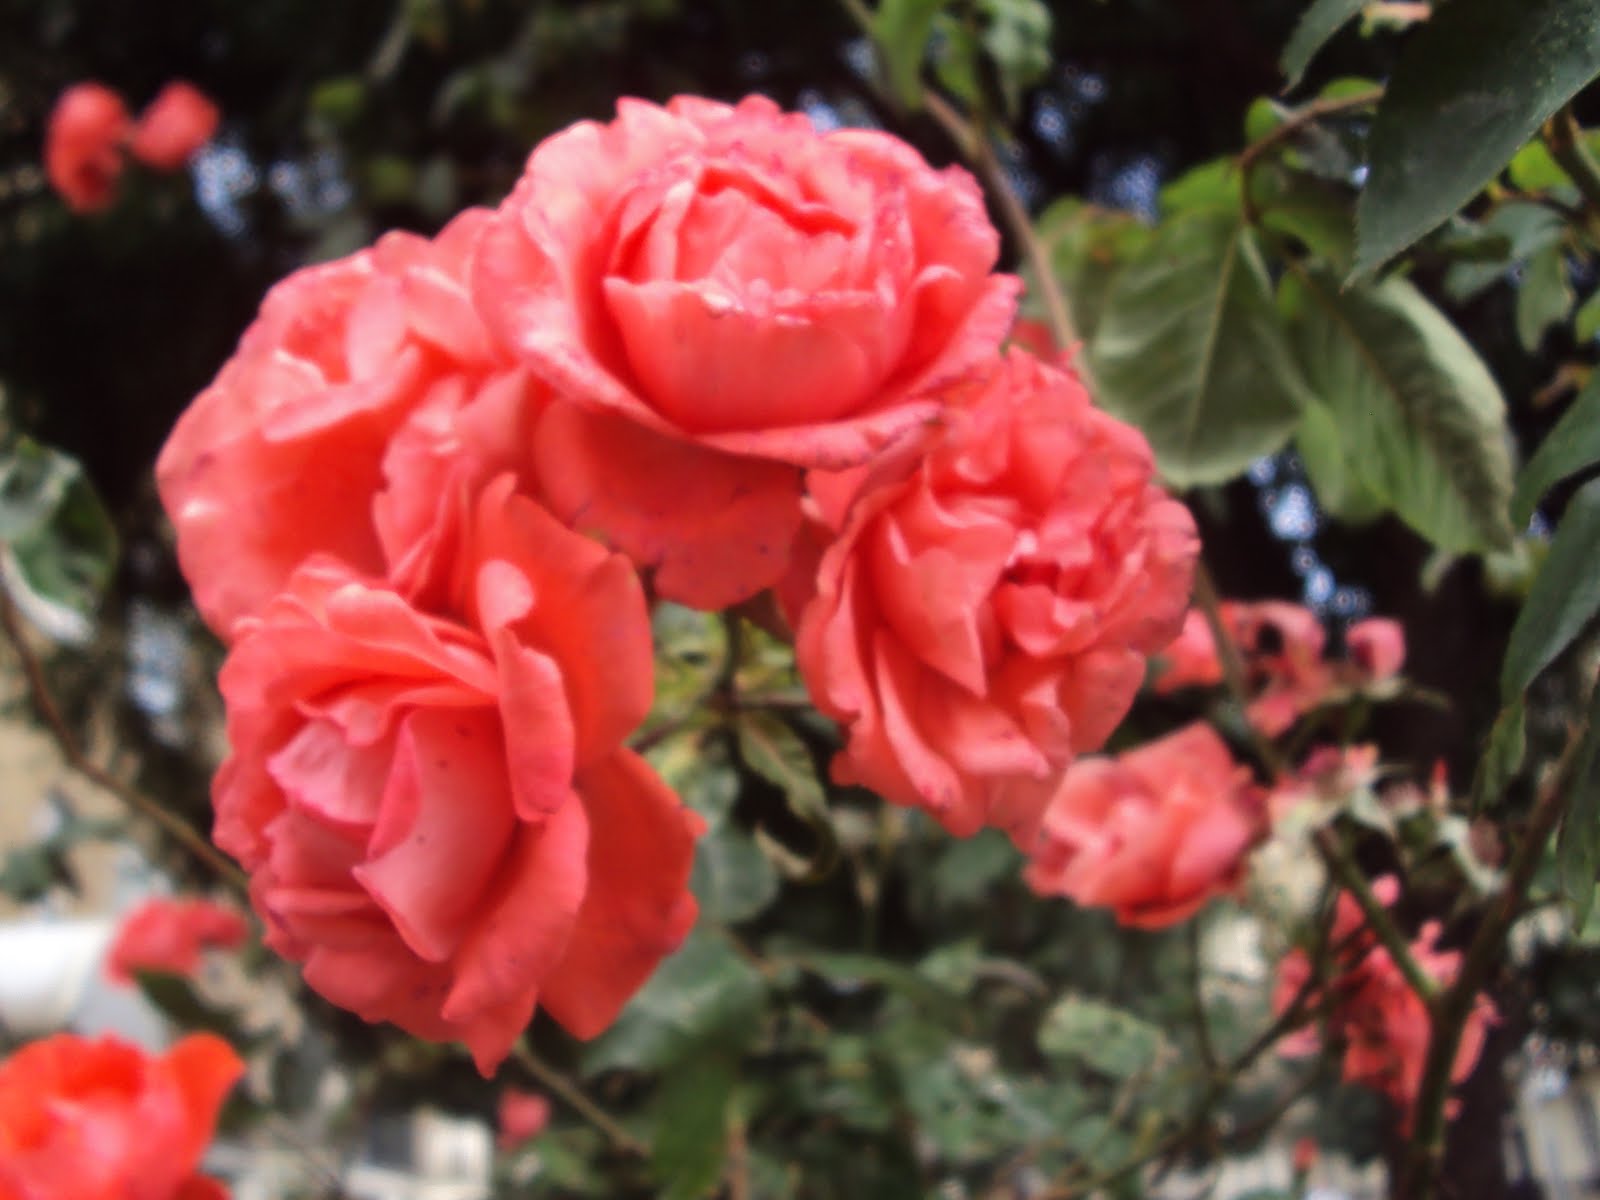 Art award silver: photo of red roses outside tate britain